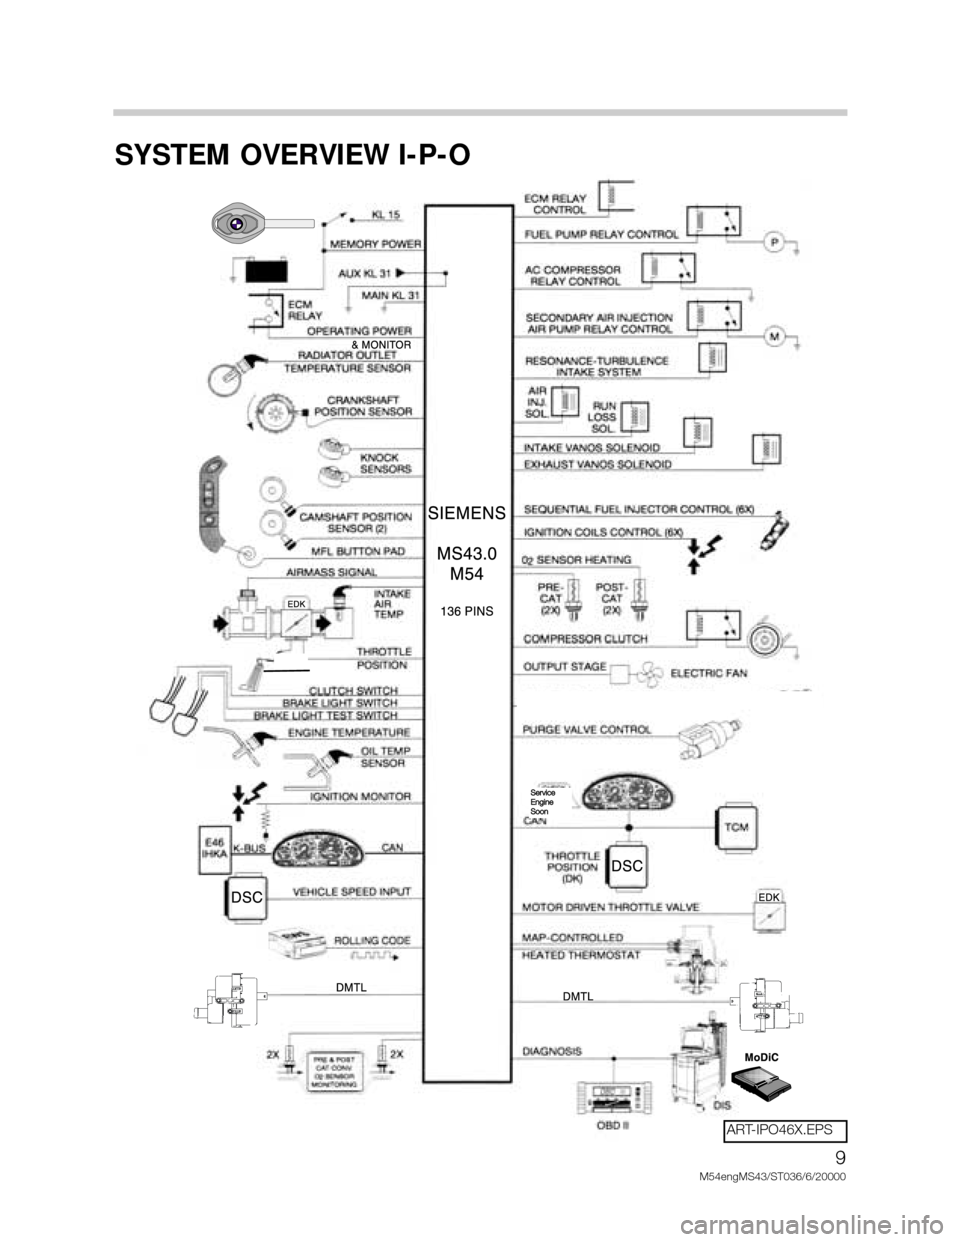 BMW X5 2002 E53 M54 Engine Workshop Manual 9
M54engMS43/ST036/6/20000
SYSTEM OVERVIEW I-P-O
Service 
Engine
Soon
ART-IPO46X.EPS 